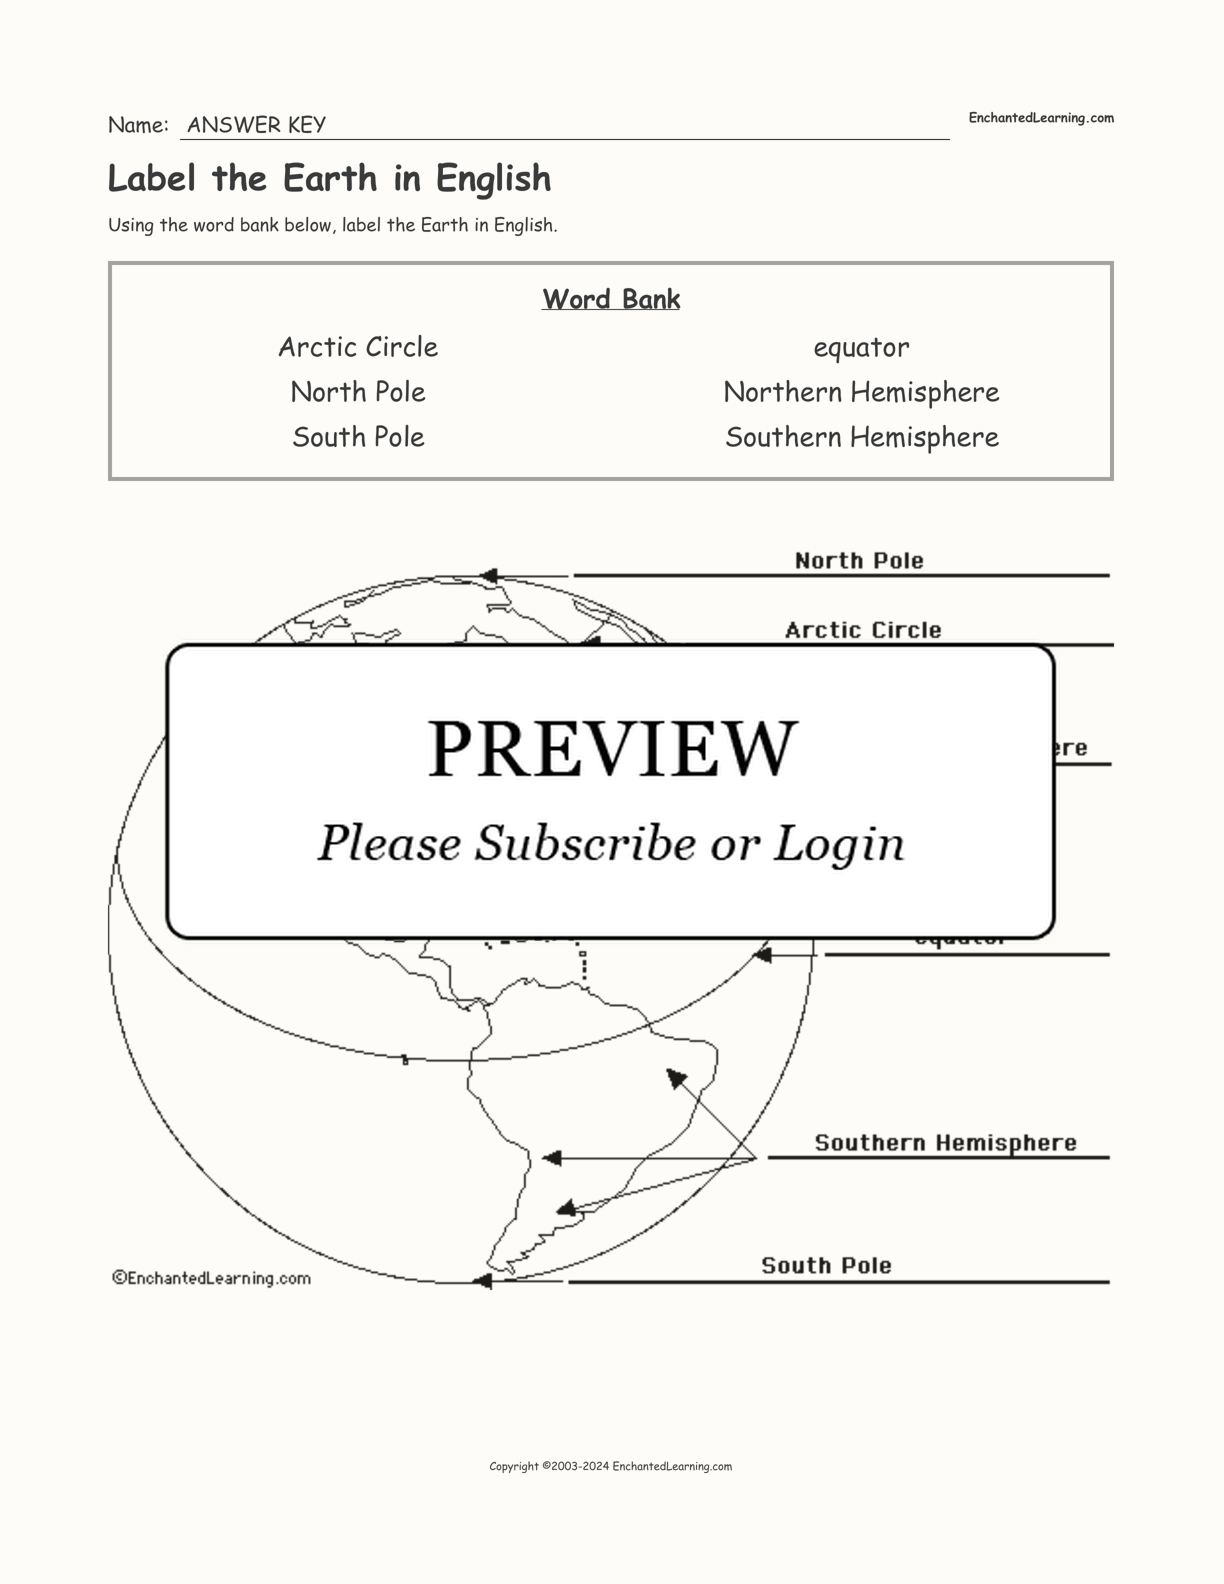 Label the Earth in English interactive worksheet page 2